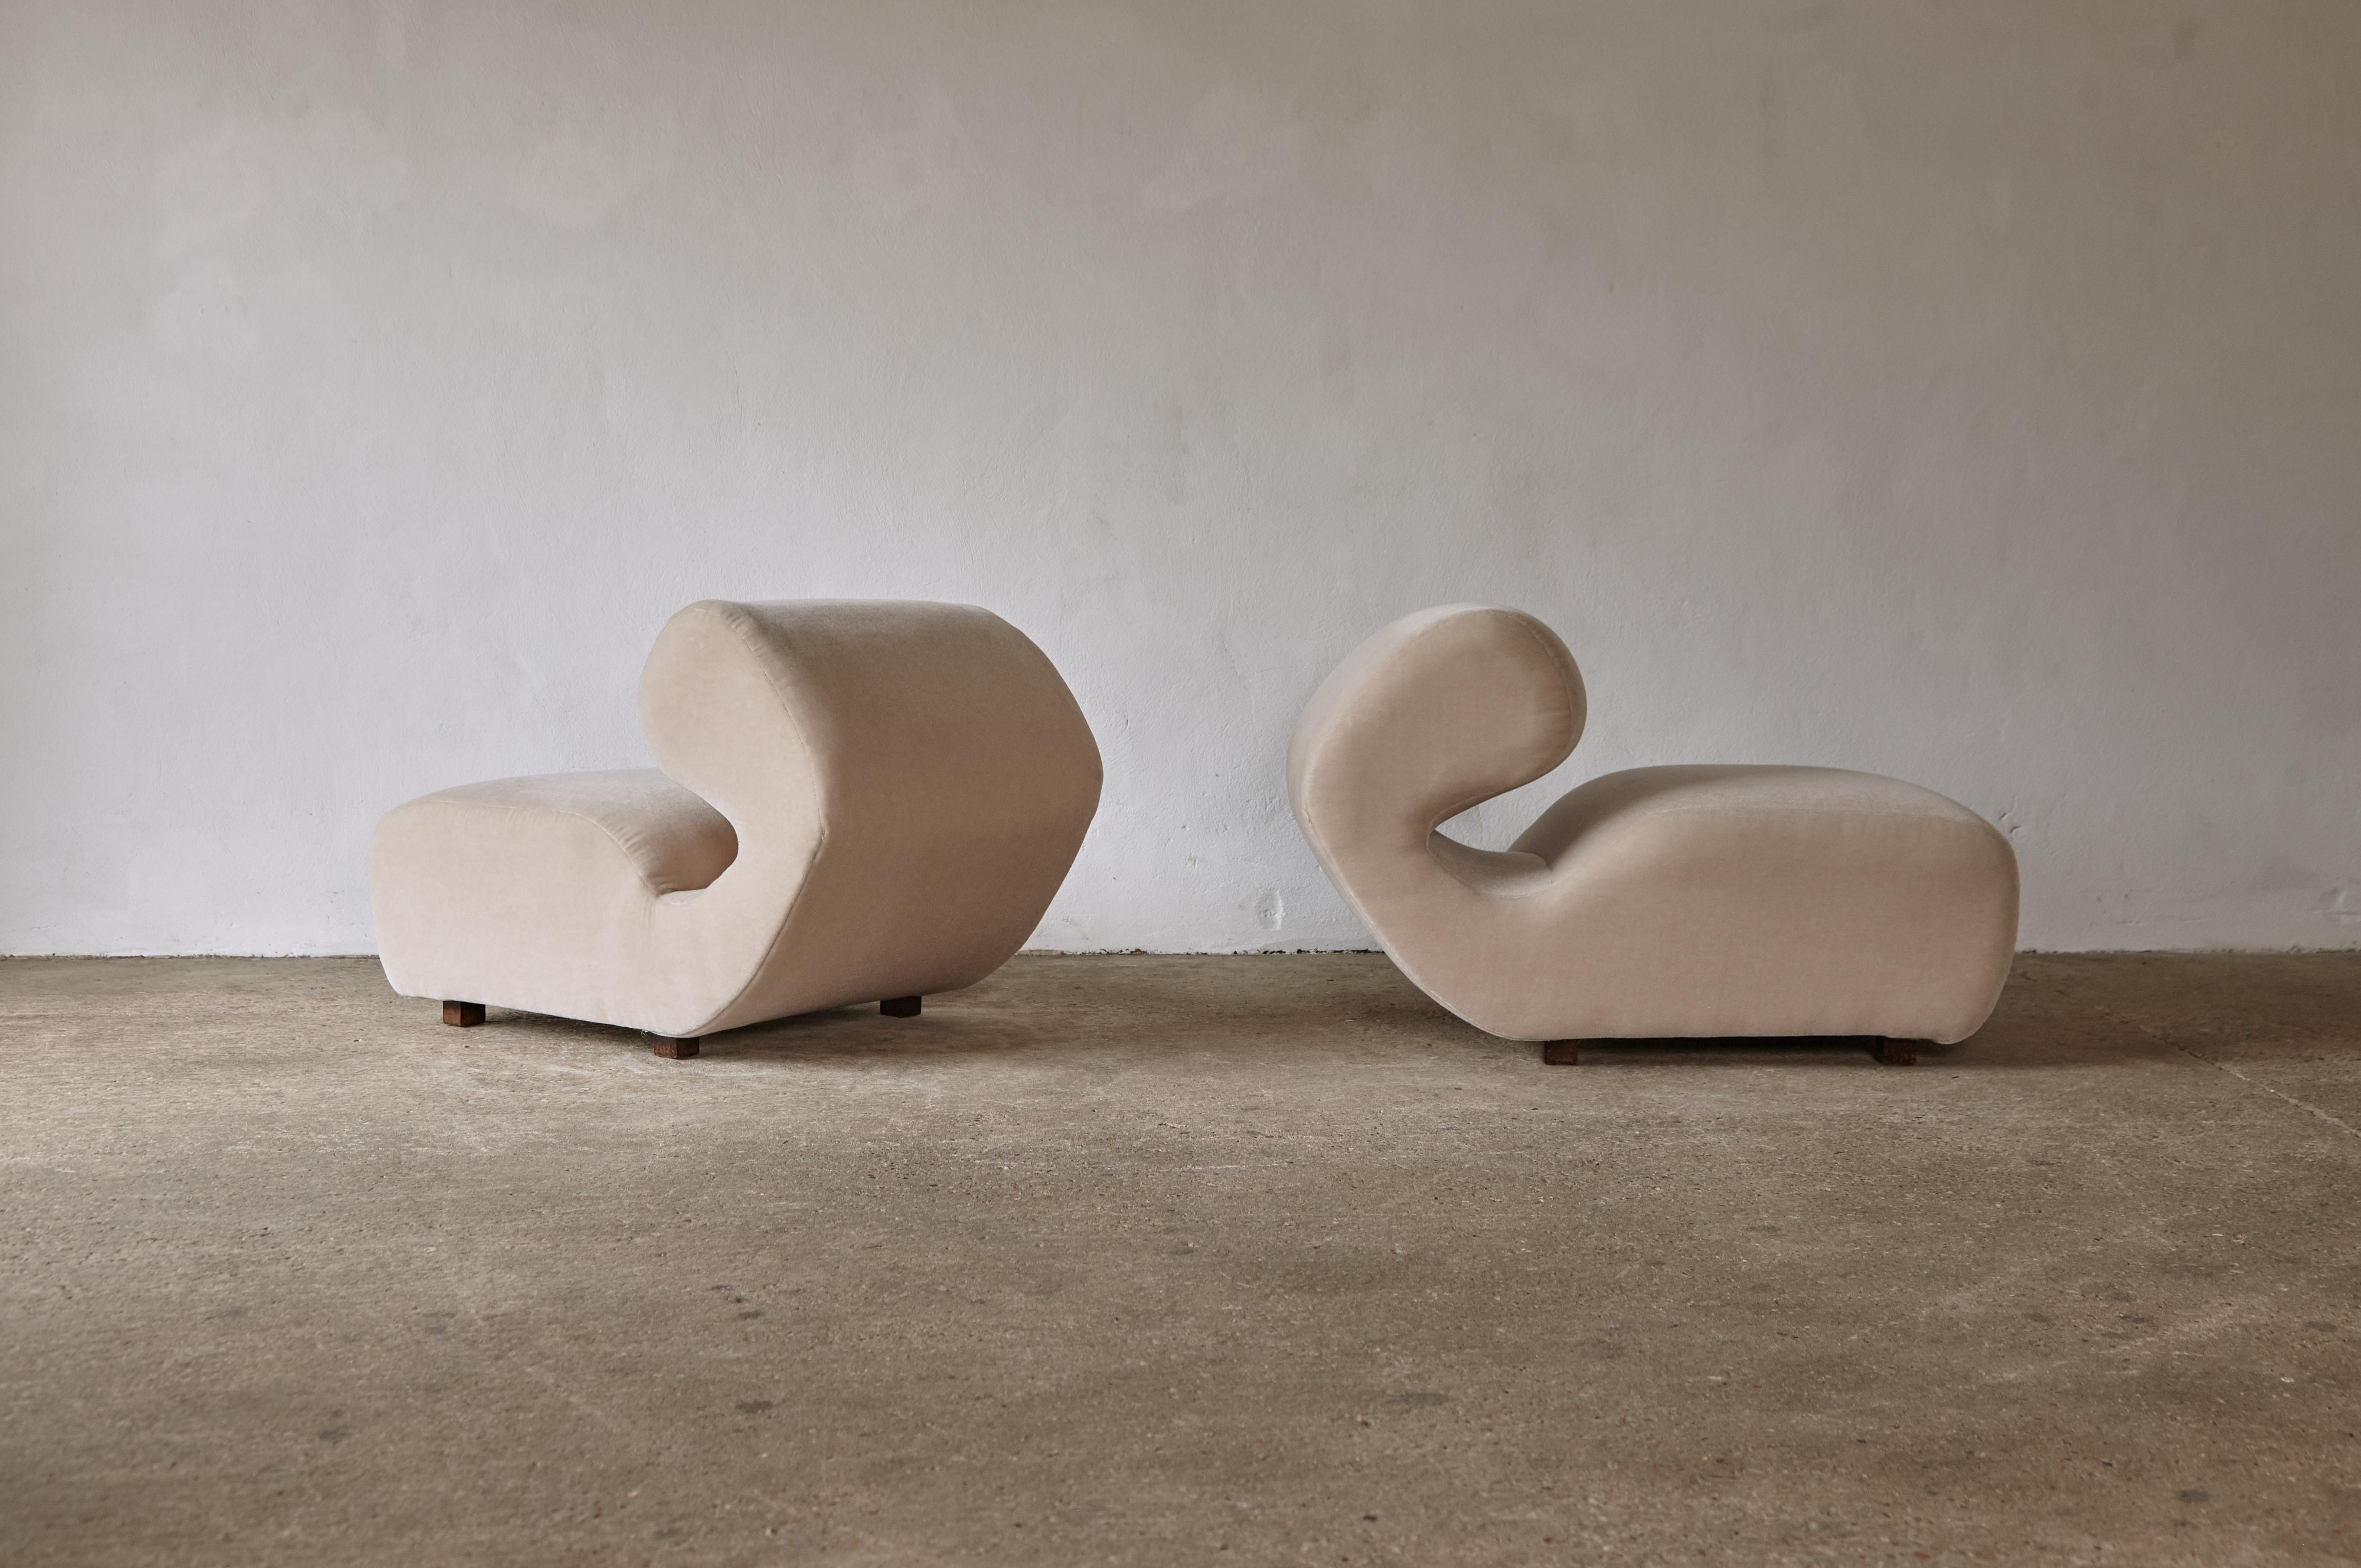 A superb pair of curved scultptural lounge chairs, Italian,  1970s/80s.  Newly upholstered in a premium ivory 100% mohair fabric.  Fast shipping worldwide.
  


